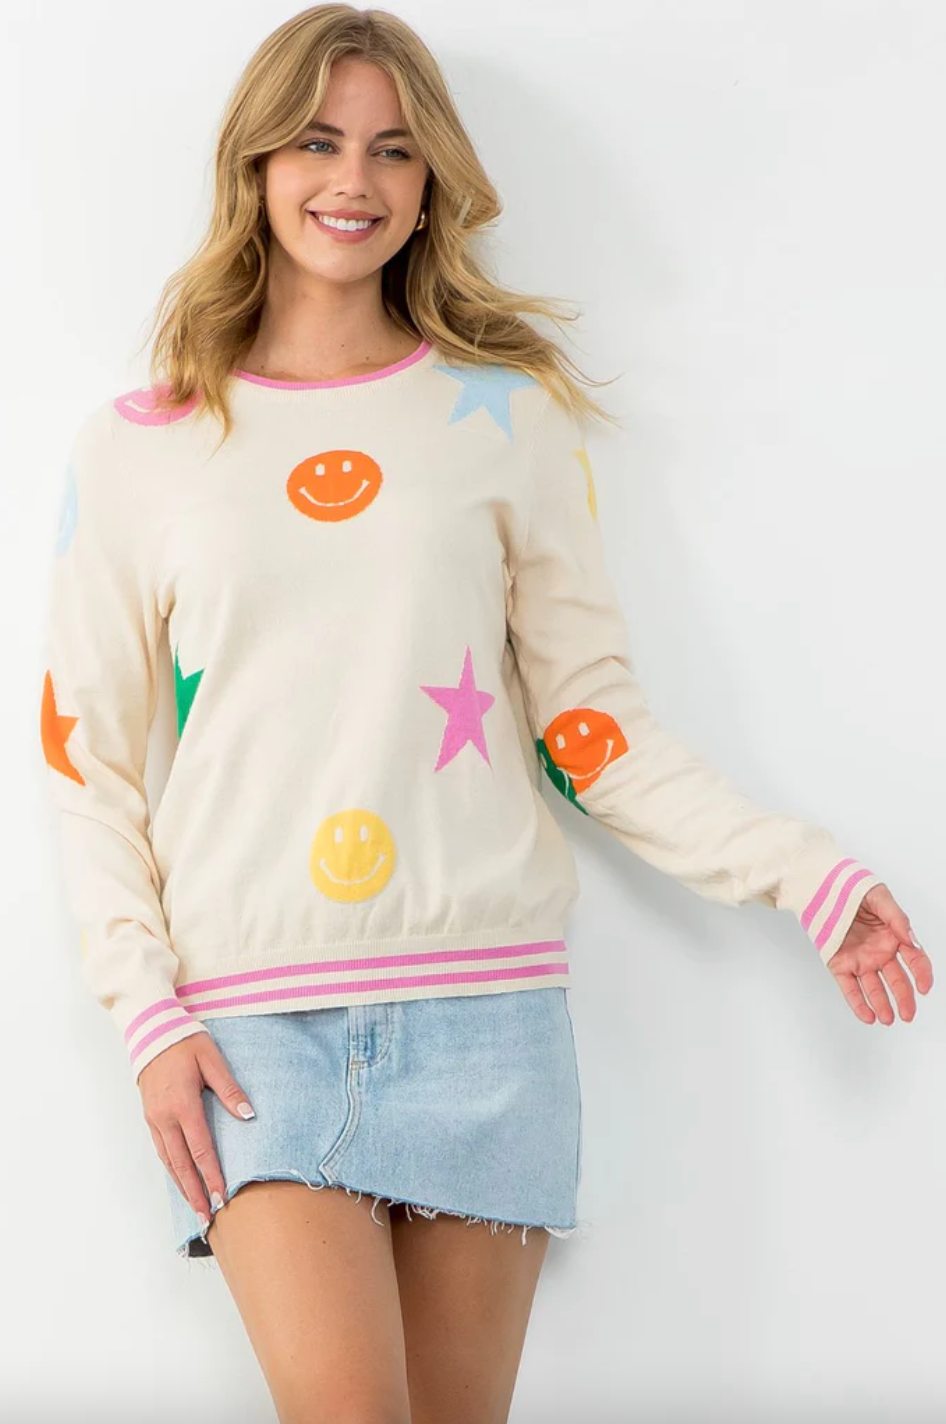 Smiley Faces and Stars Sweater